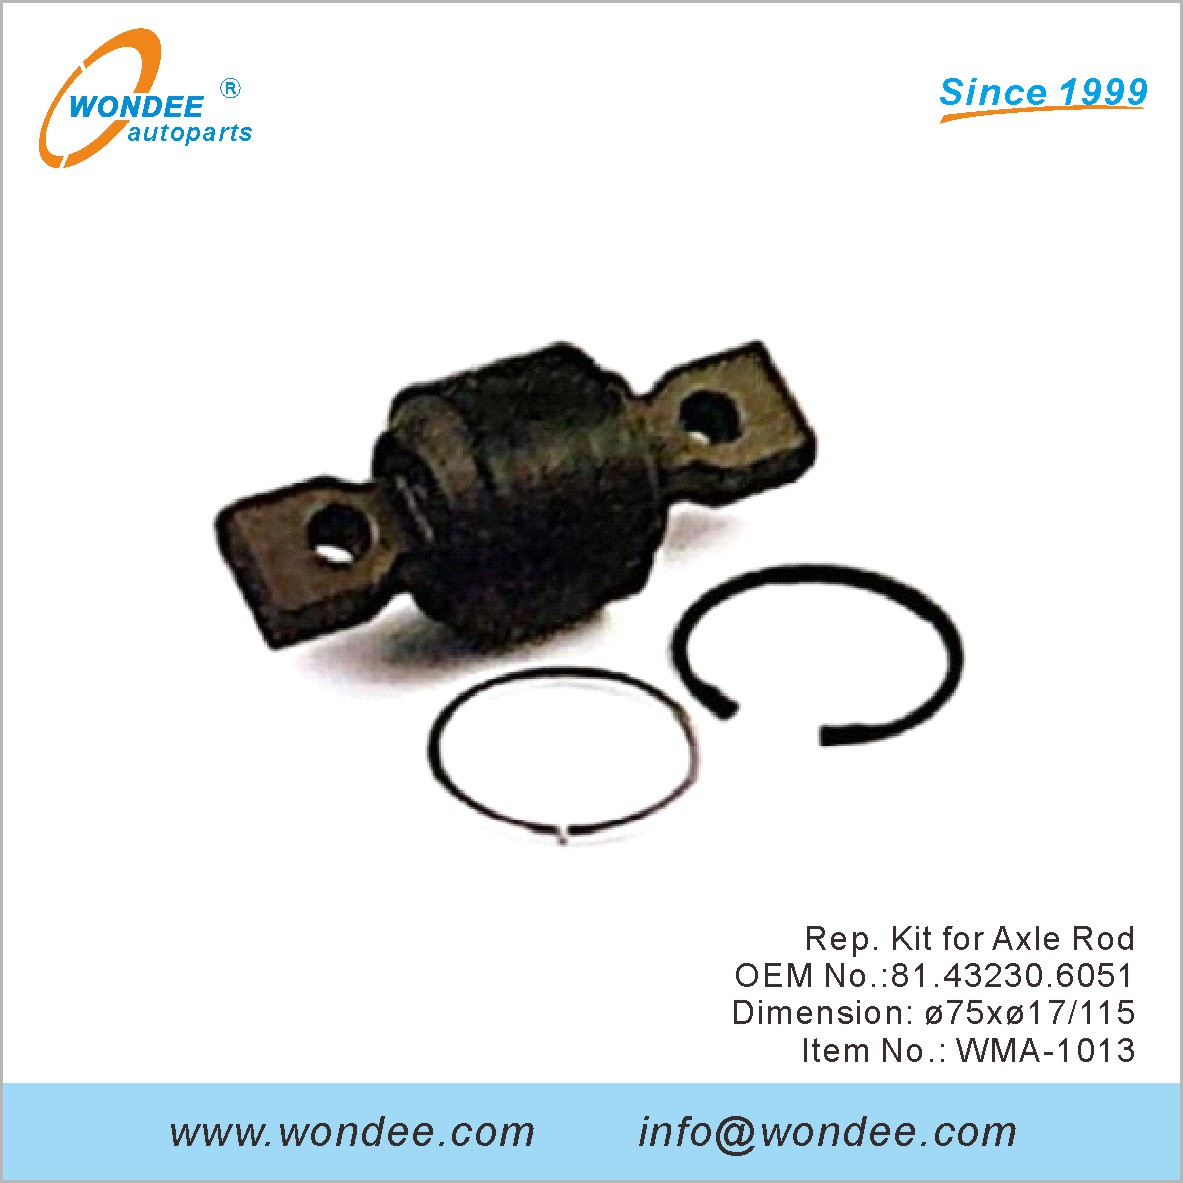 Man Type Rubber Bushing, Repair Kits, Stabilizer Mounting, Cabin Mounting for Truck